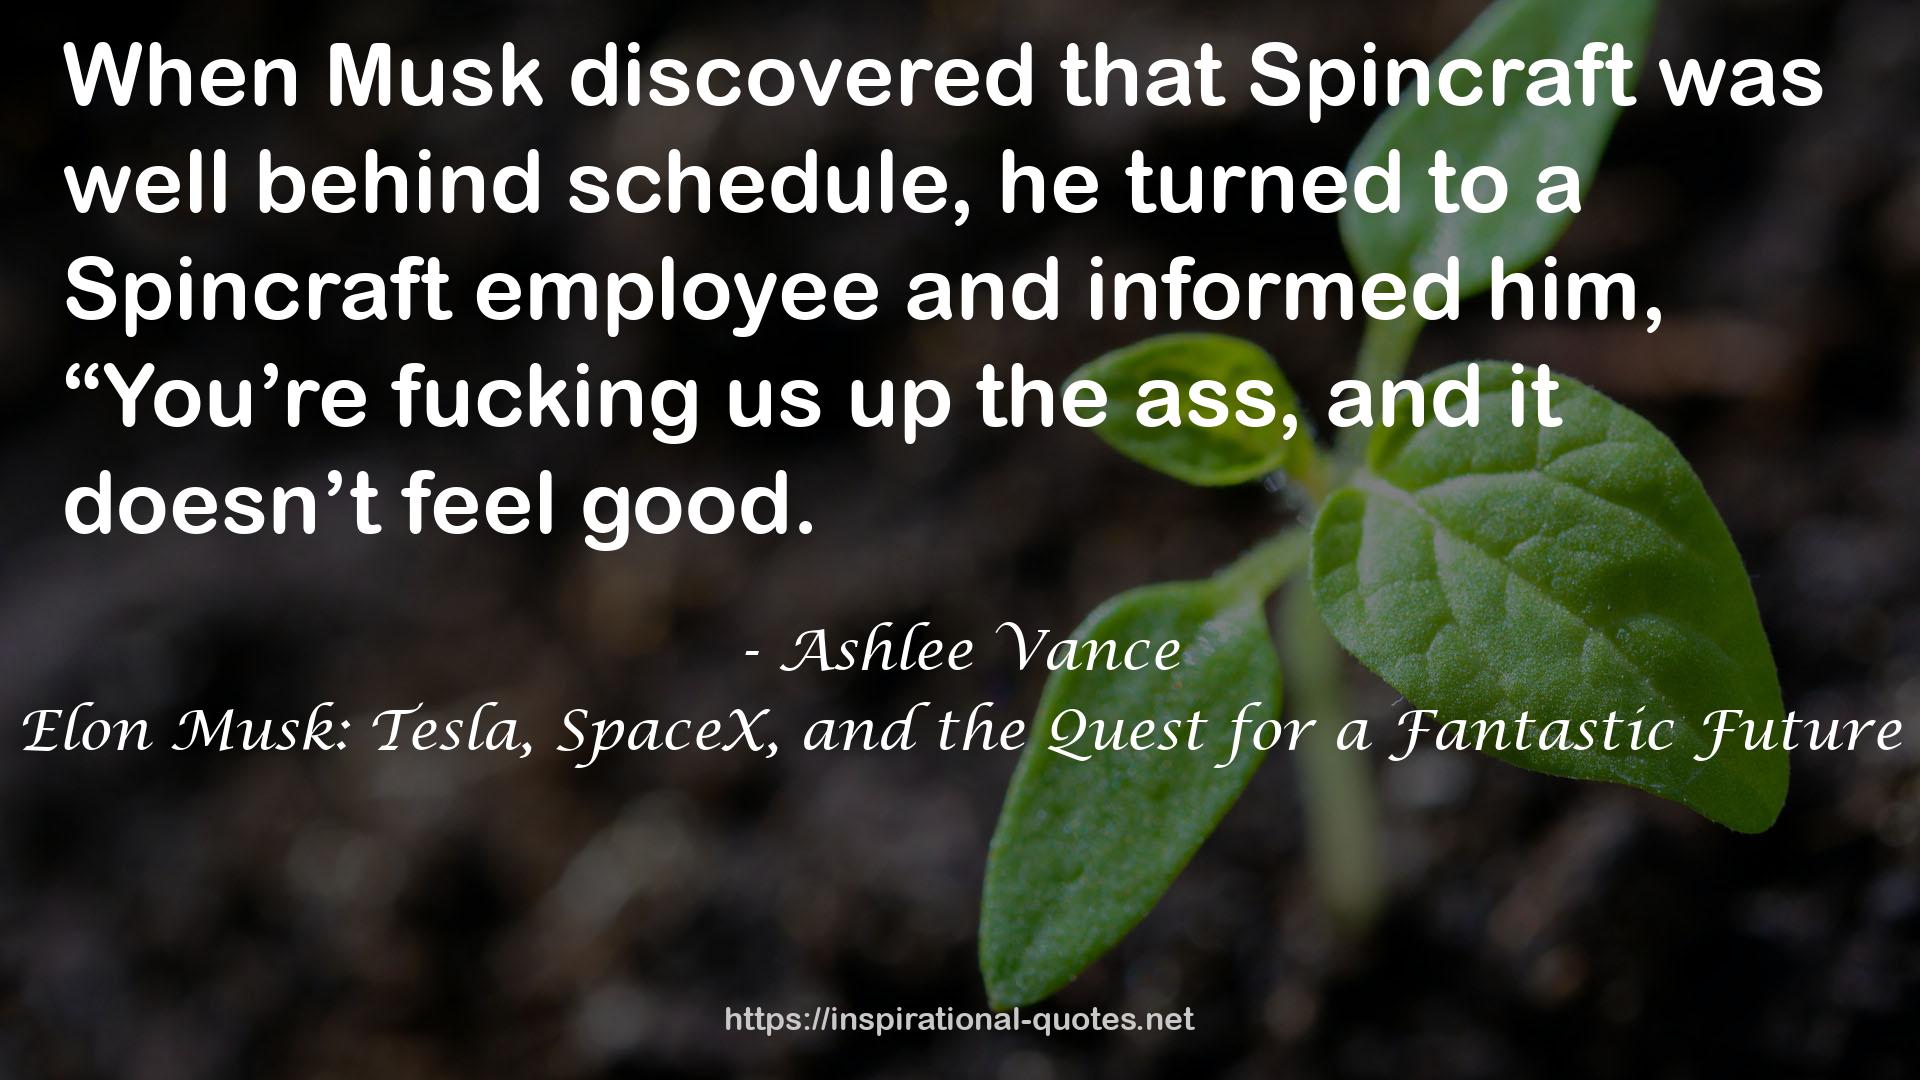 Elon Musk: Tesla, SpaceX, and the Quest for a Fantastic Future QUOTES